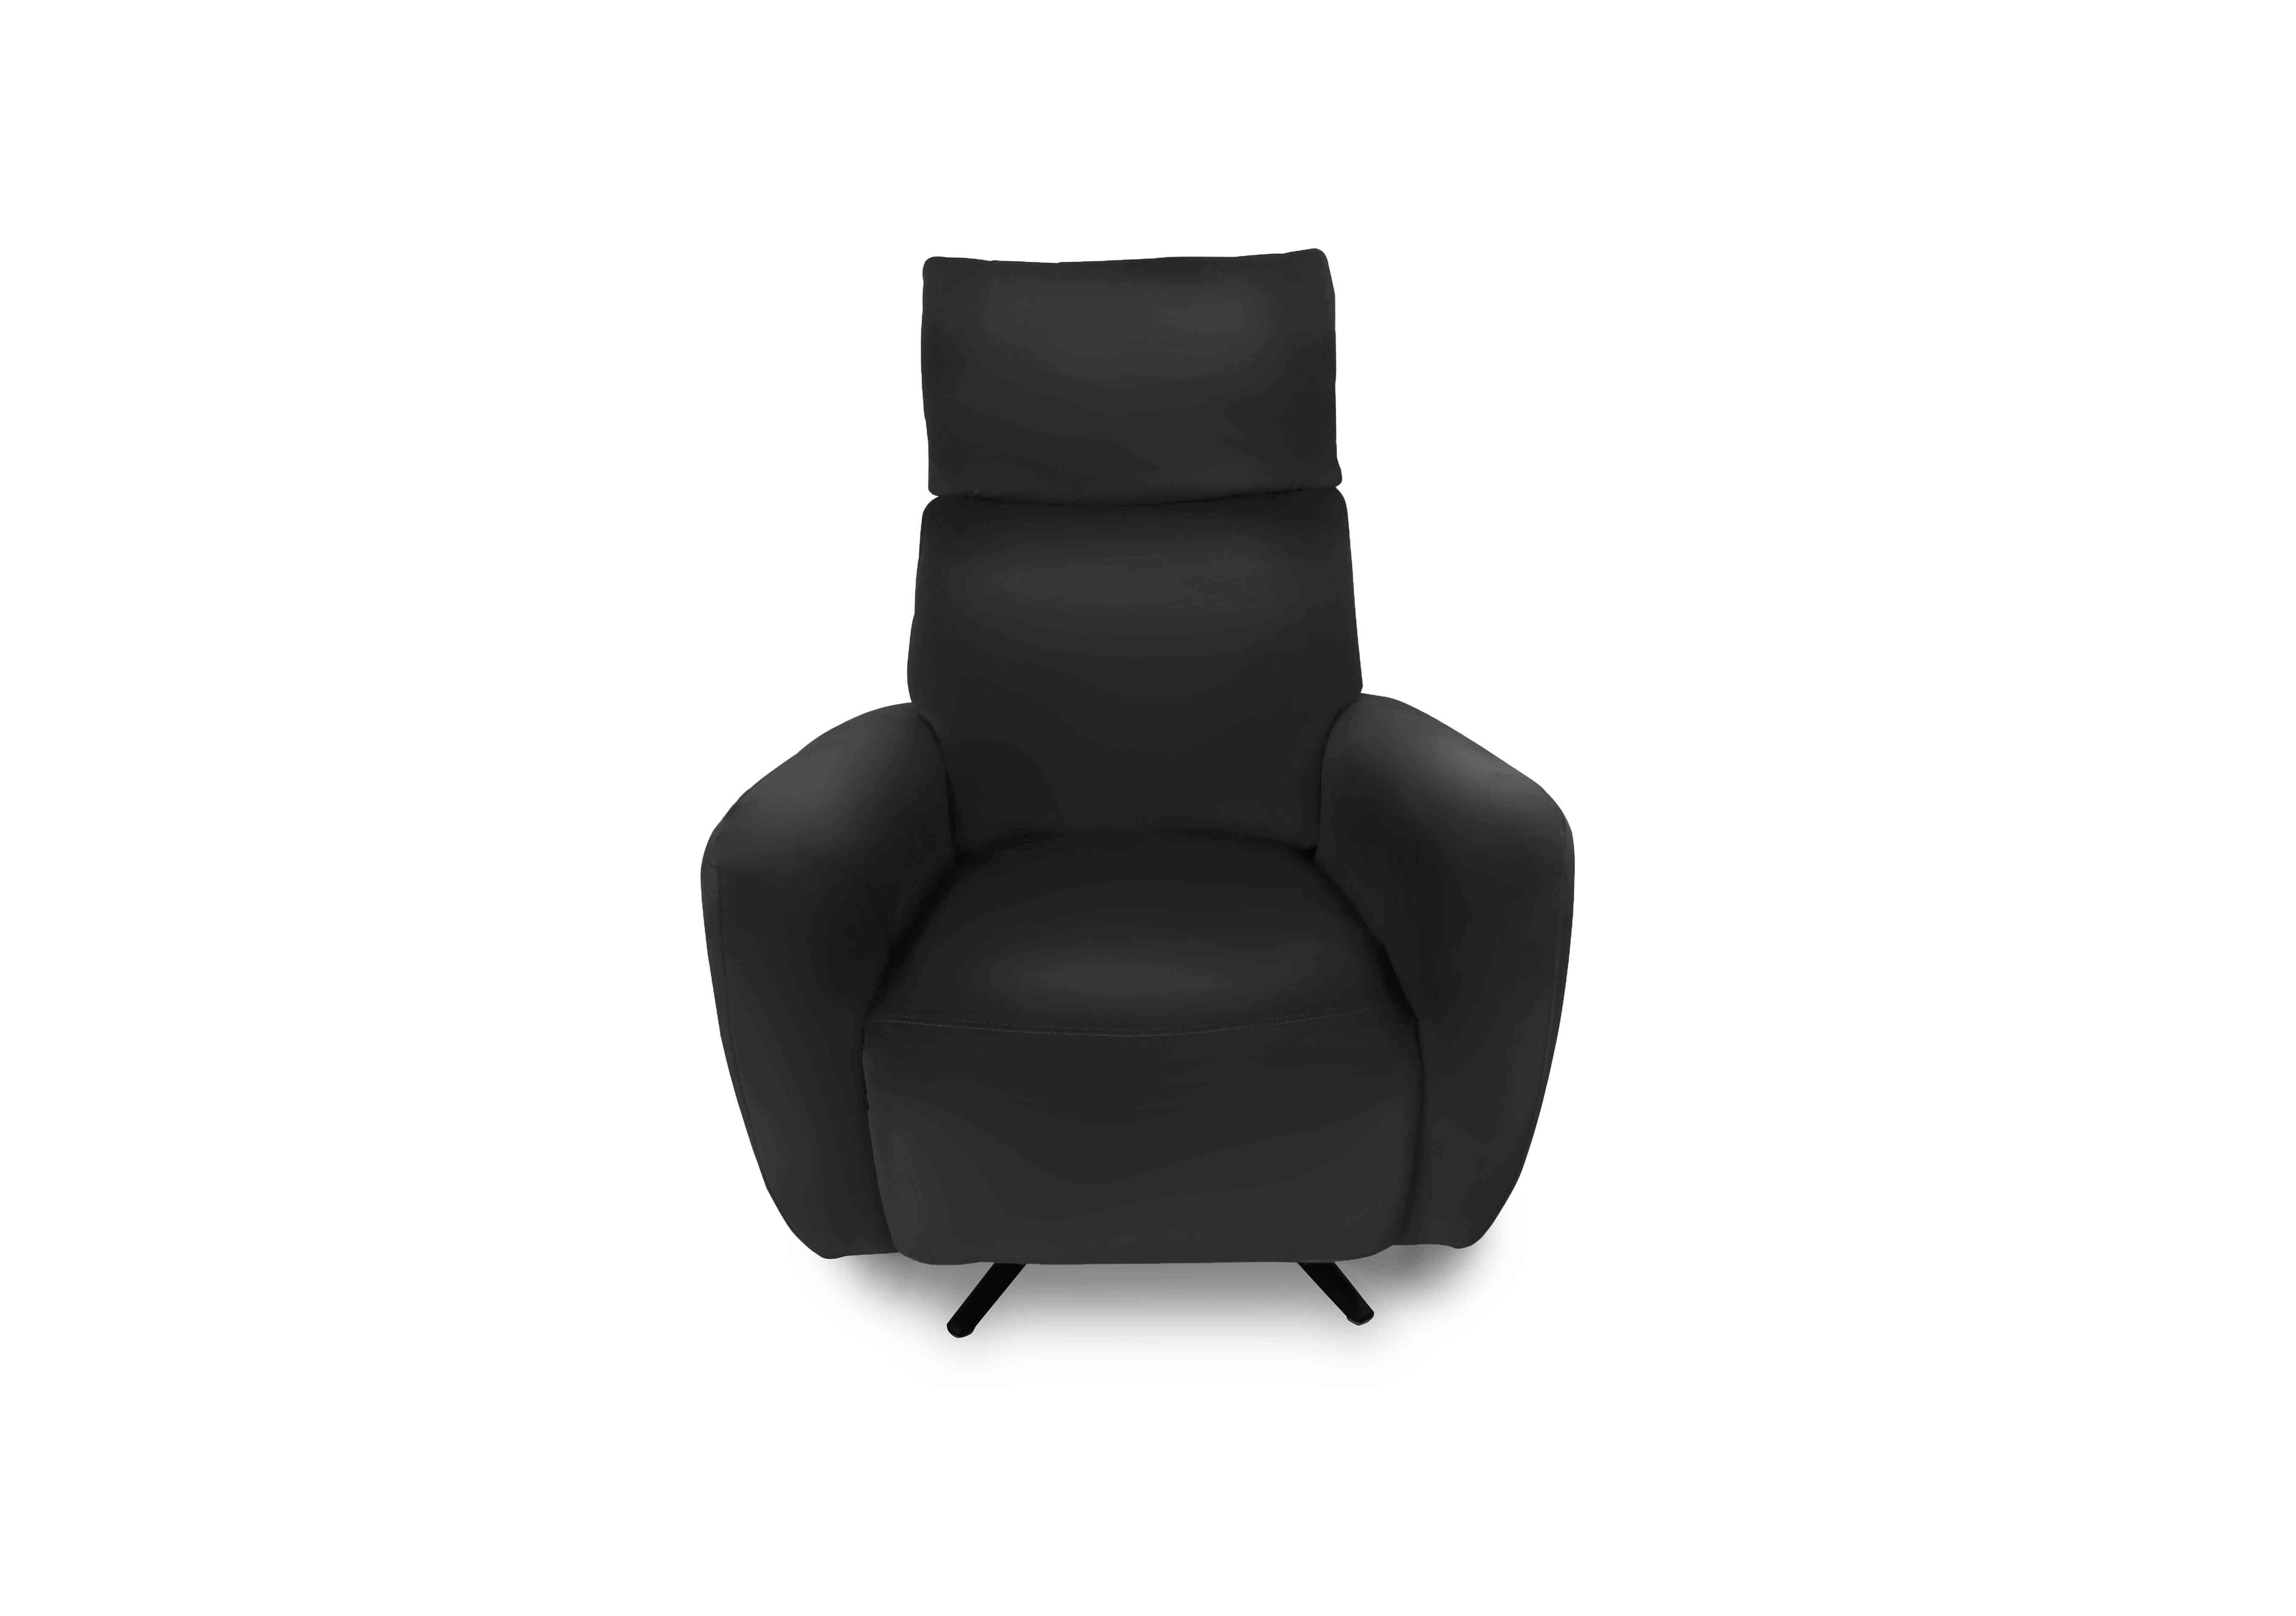 Designer Chair Collection Granada Leather Power Recliner Swivel Chair with Massage Feature in Bv-3500 Classic Black on Furniture Village